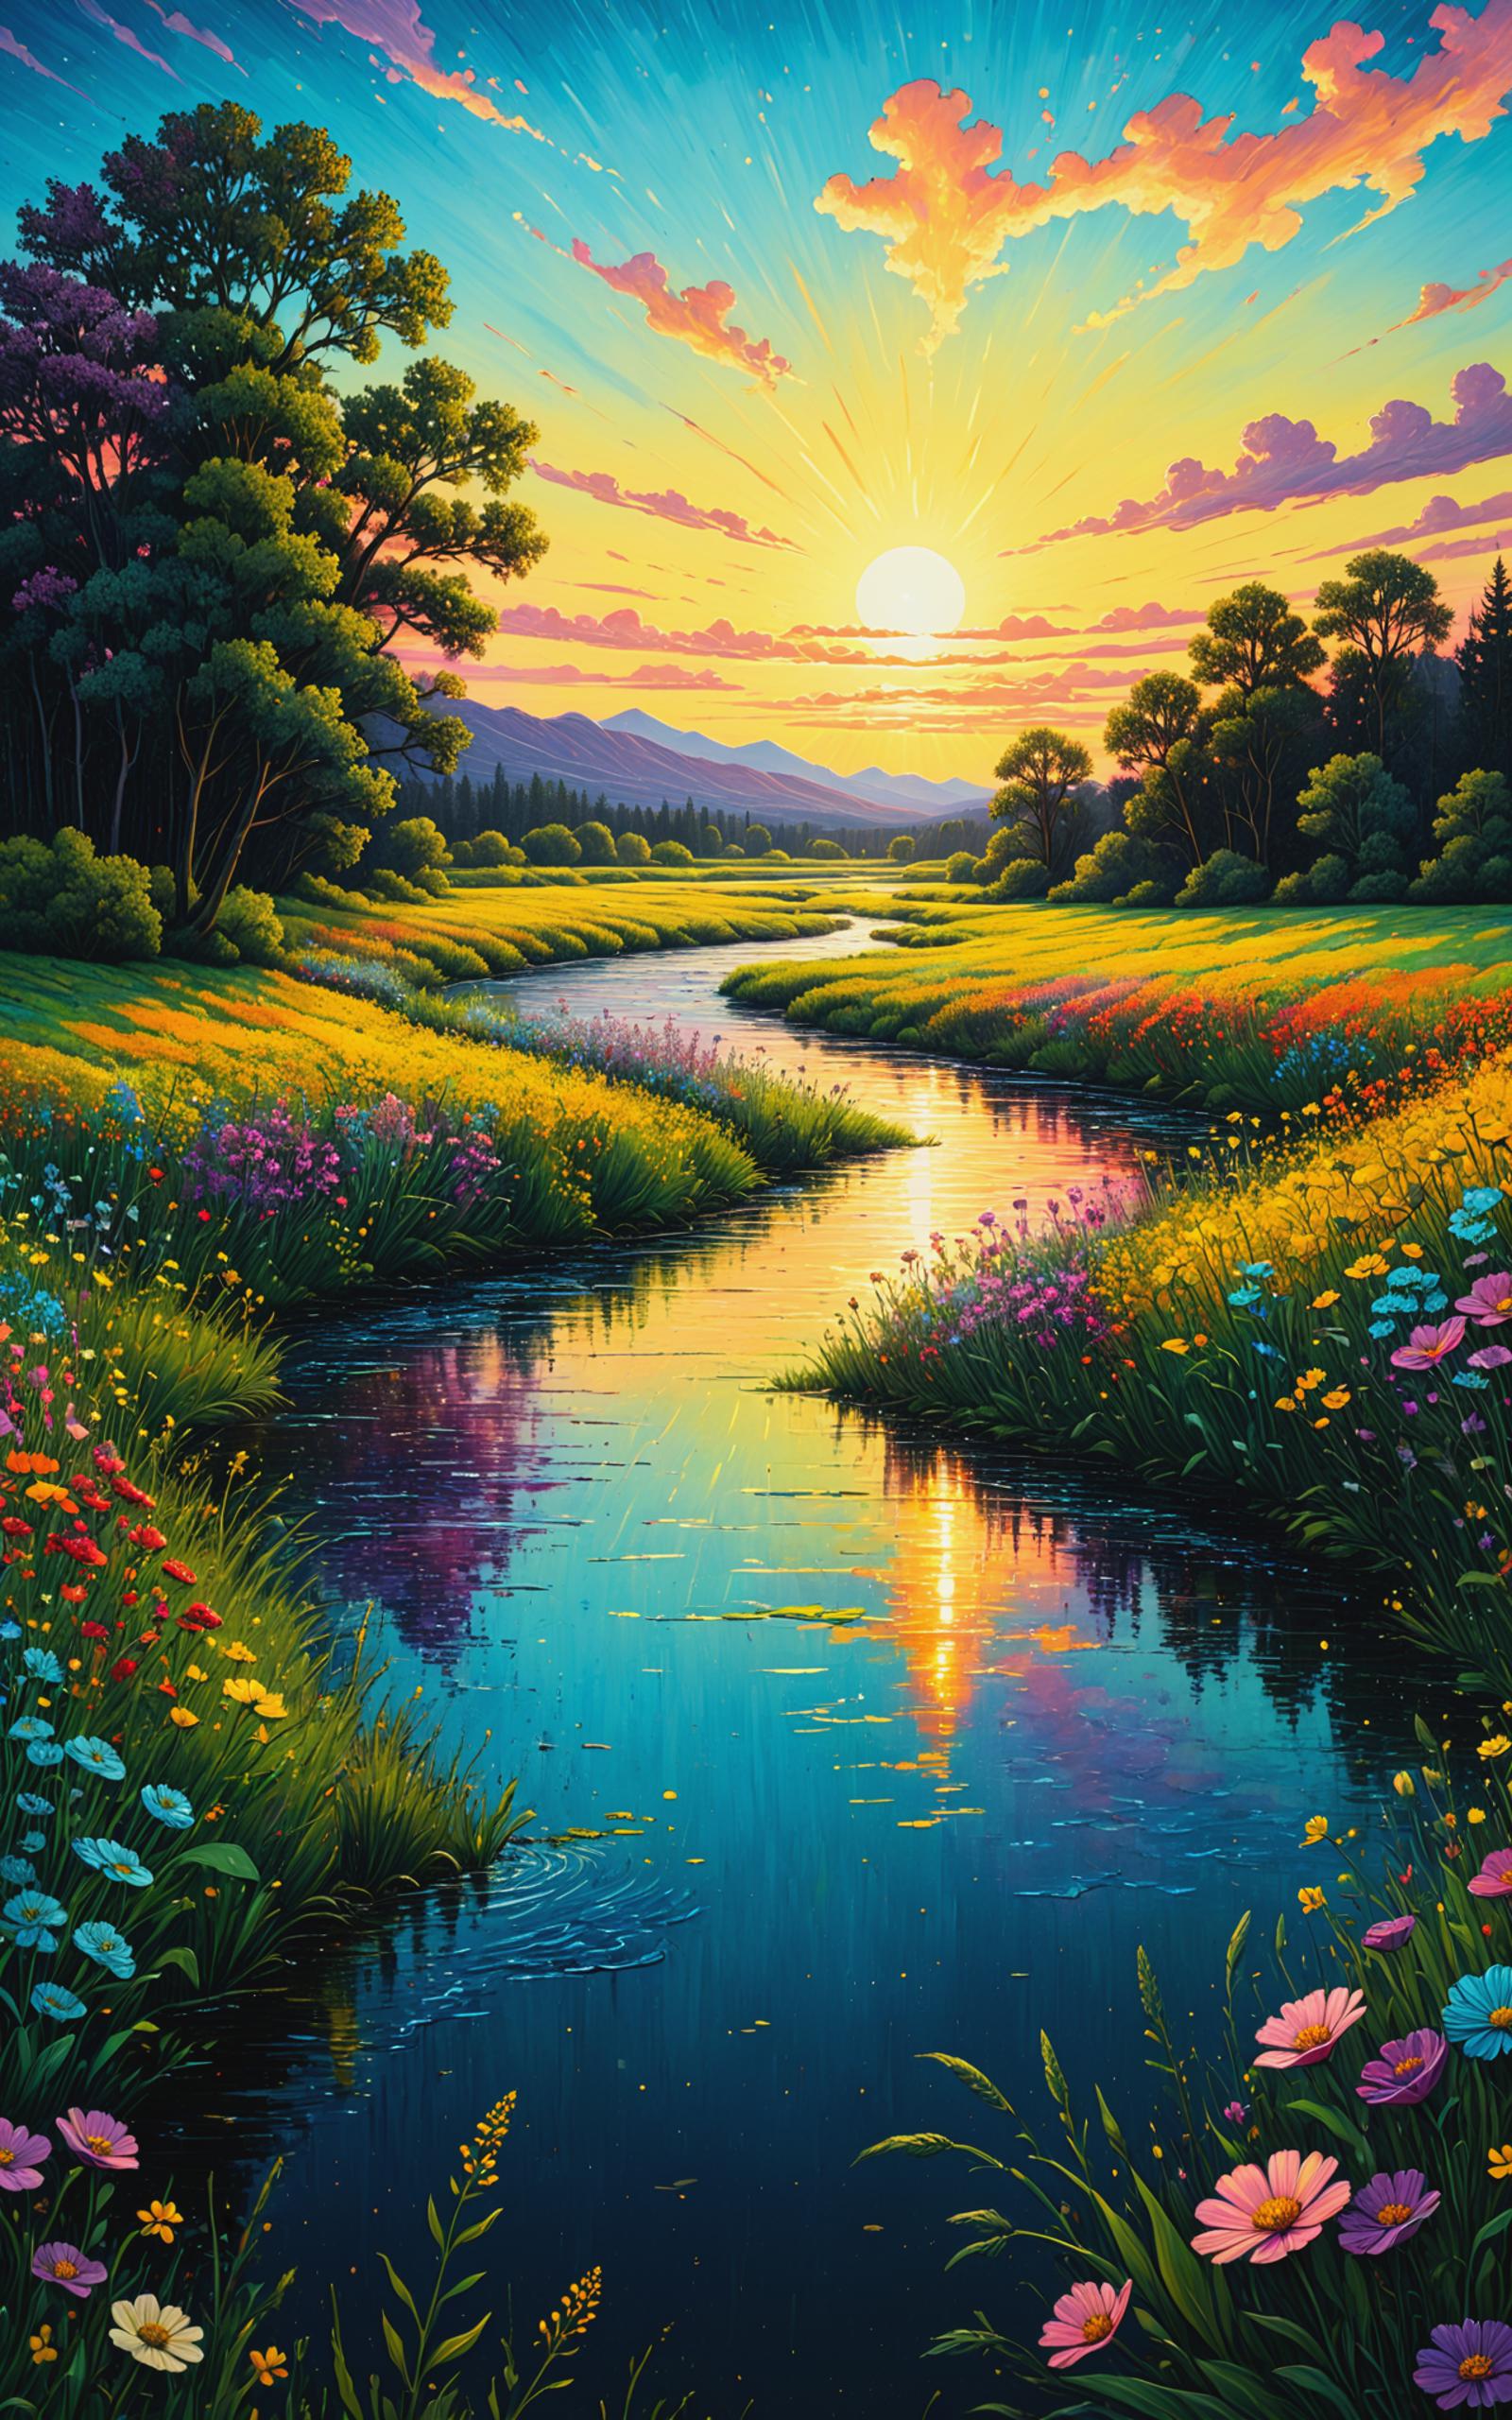 A serene painting of a river with a waterfall, surrounded by a lush green field filled with vibrant flowers. The water appears blue and the sun is shining brightly, casting a warm glow on the scene.